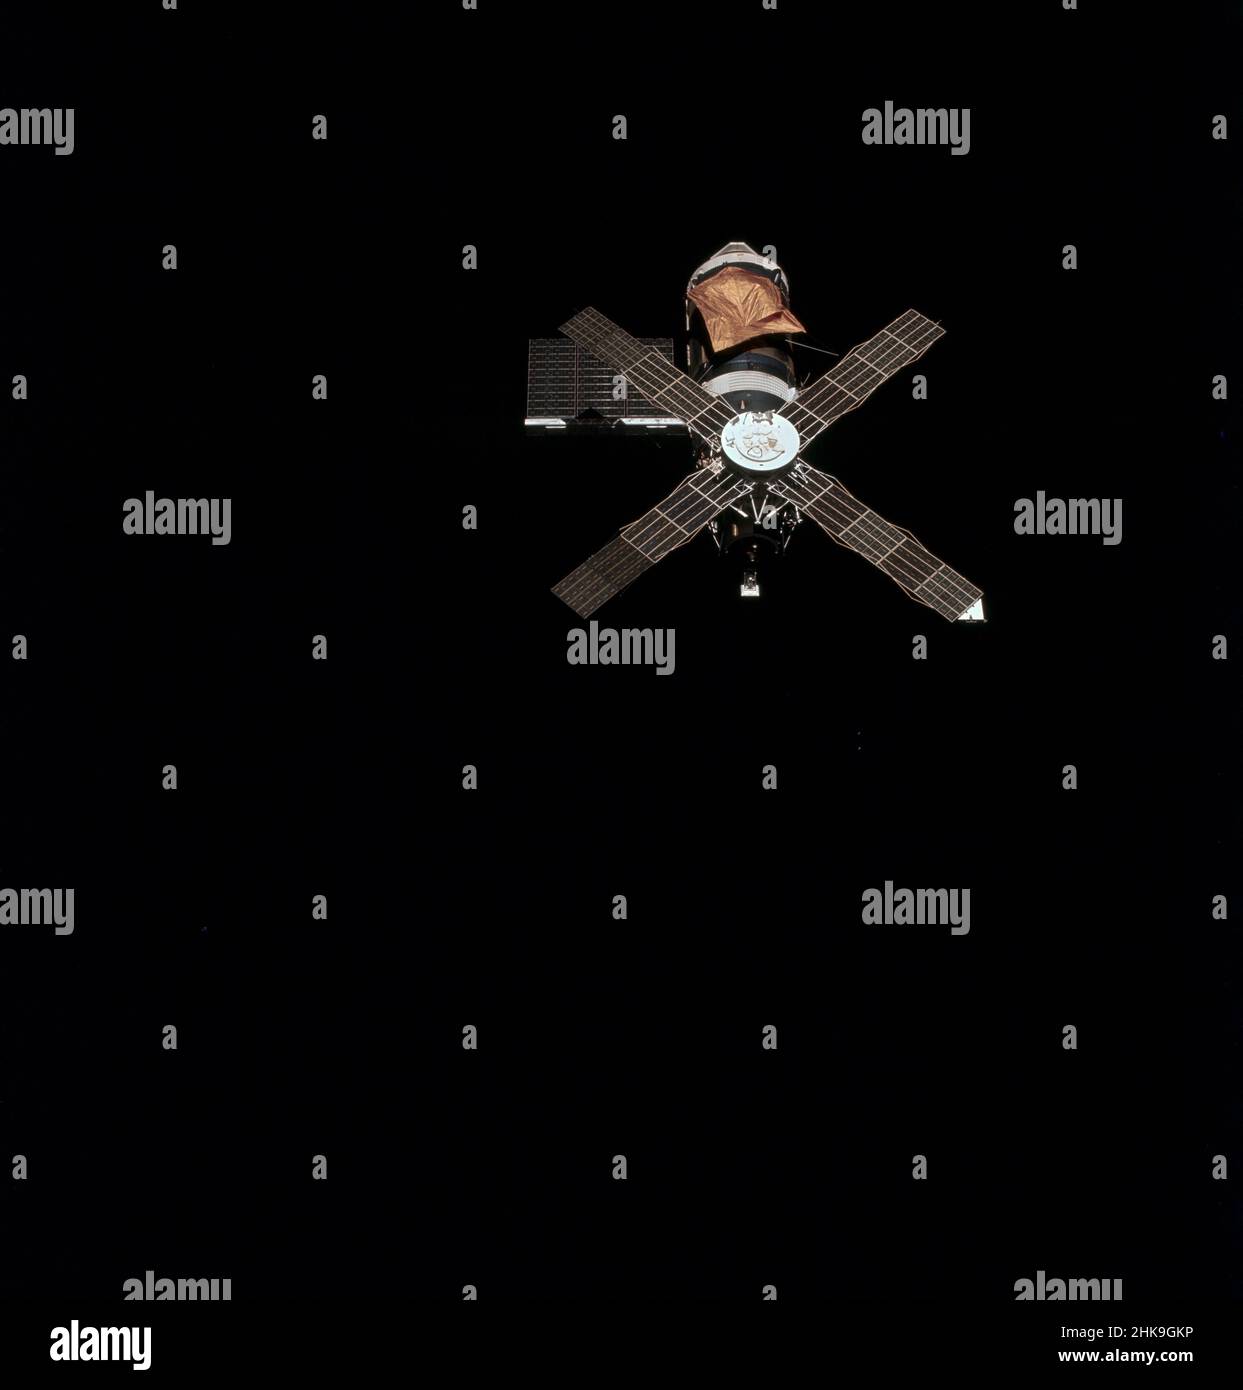 (22 June 1973) --- An overhead view of the Skylab 1 space station cluster in Earth orbit photographed from the Skylab 2 Command/Service Module during the final ?fly around? inspection by the CSM. The space station is sharply contrasted against a black sky background. Note the deployed parasol solar shield which shades the Orbital Workshop where the micrometeoroid shield is missing. The one remaining OWS solar array system wing has been fully deployed successfully. The OWS solar panel on the opposite side is missing completely. Stock Photo